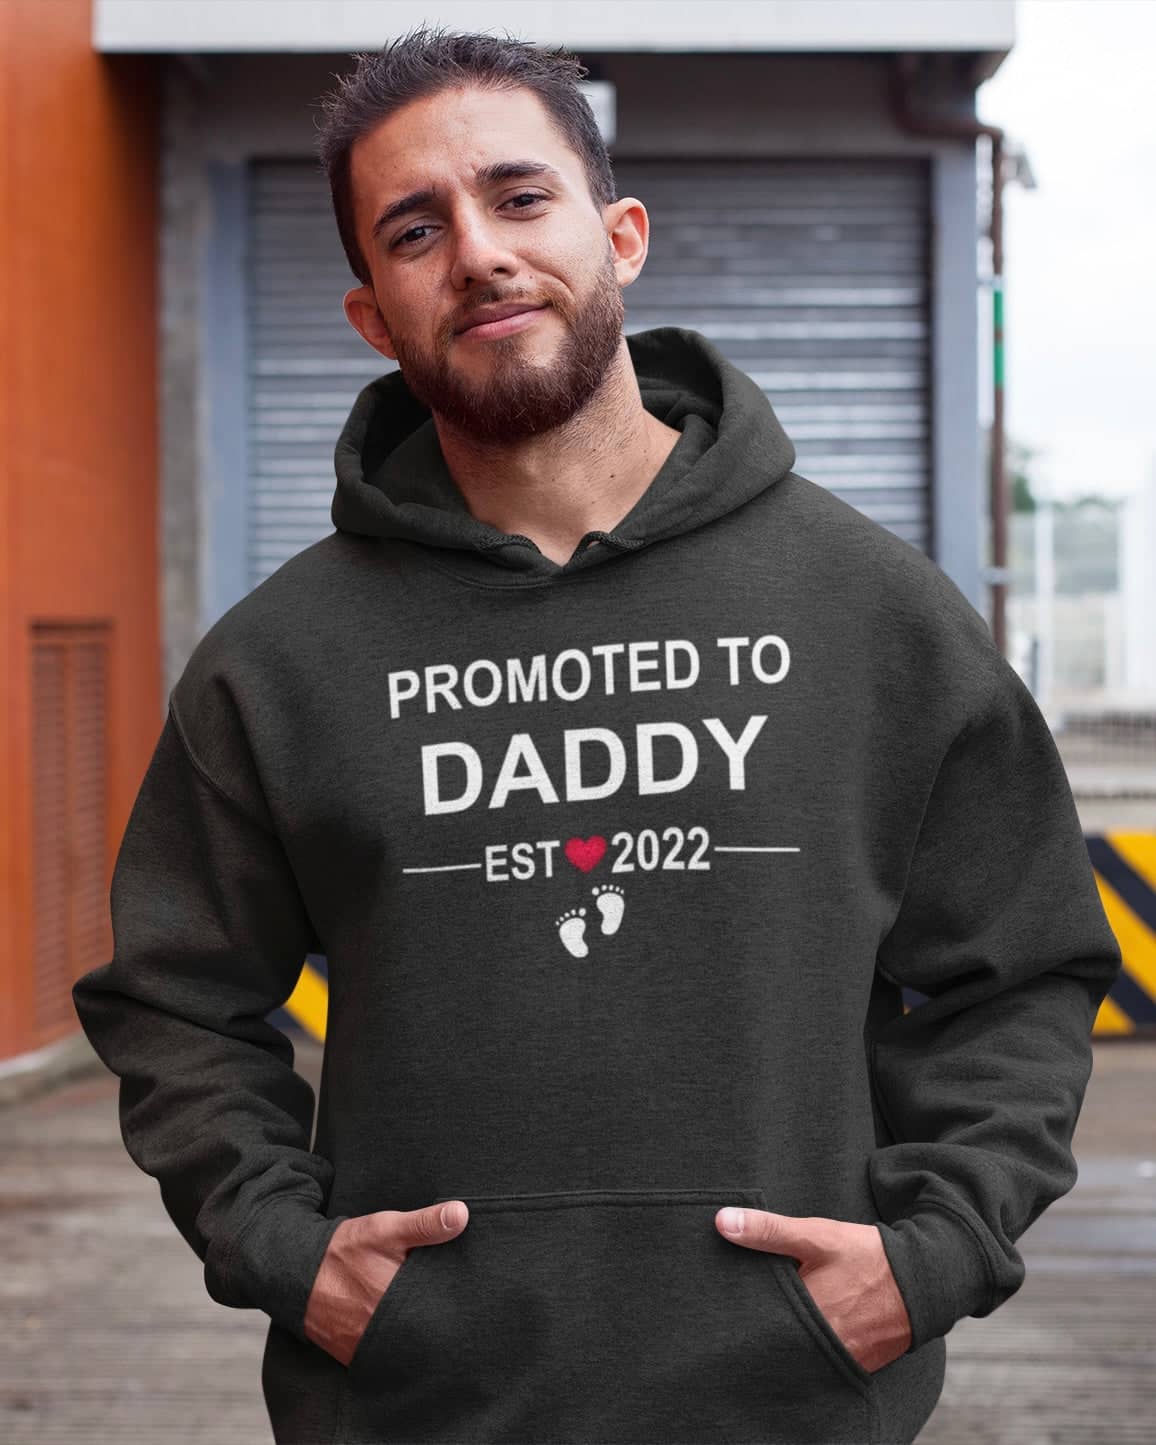 Promoted to Daddy Est. 2022 Exclusive T Shirt for Men freeshipping - Catch My Drift India